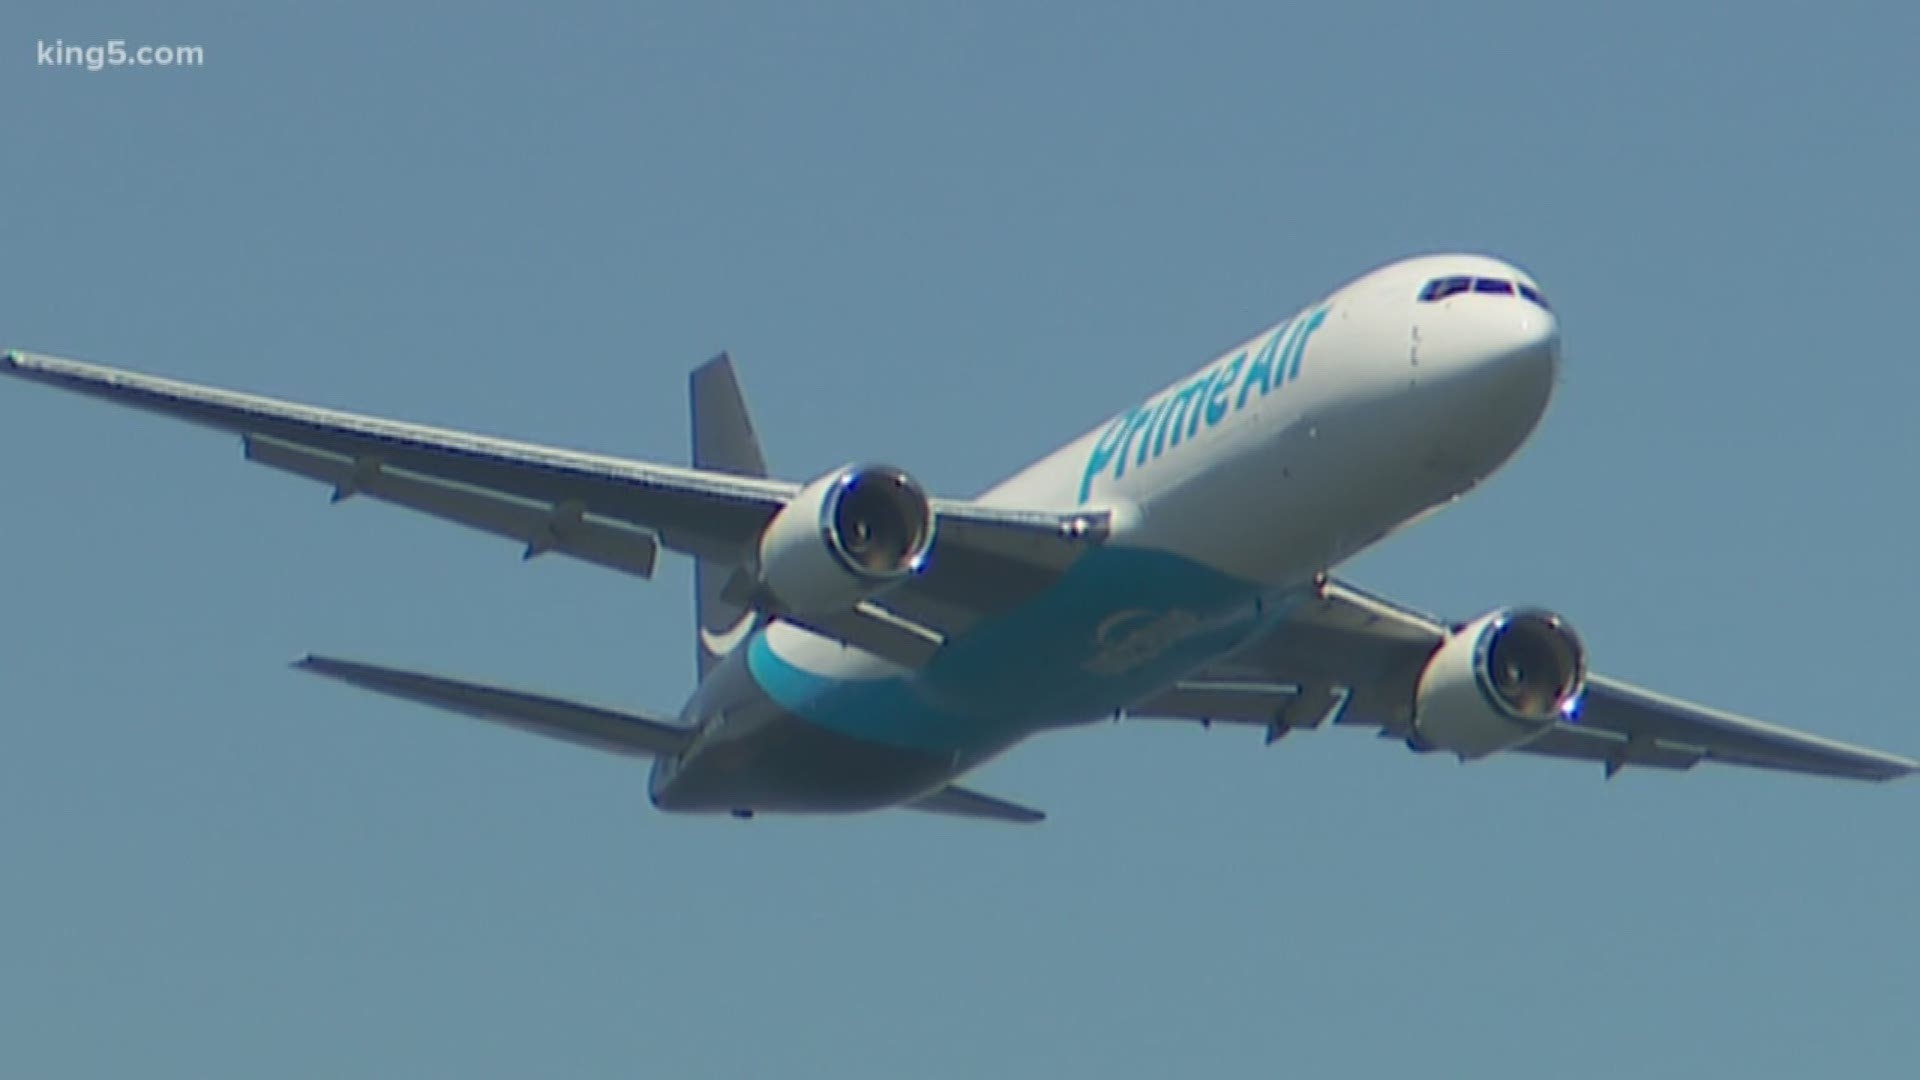 There is a mystery in the crash of a Boeing 767 flying for Amazon Prime Air. The Everett built plane was flying from Miami to Houston Saturday, at about 12:30 local time it suddenly plunged out of the sky. KING 5's Aviation Specialist Glenn Farley reports.